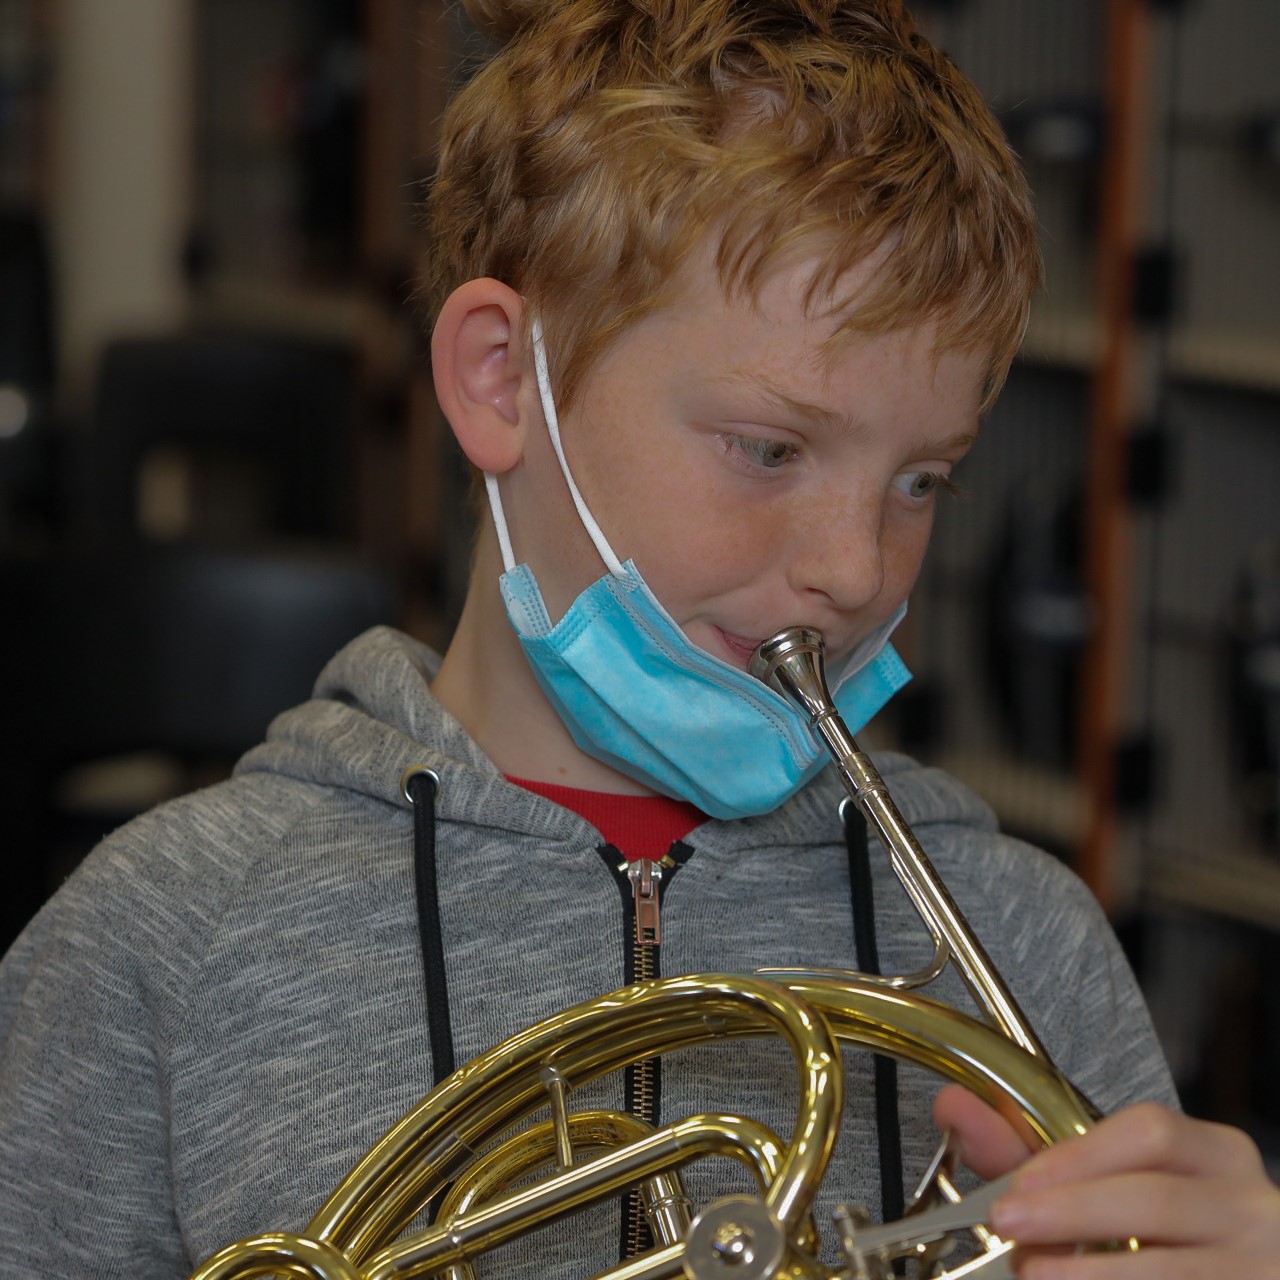 " A student plays their instruments during music class"